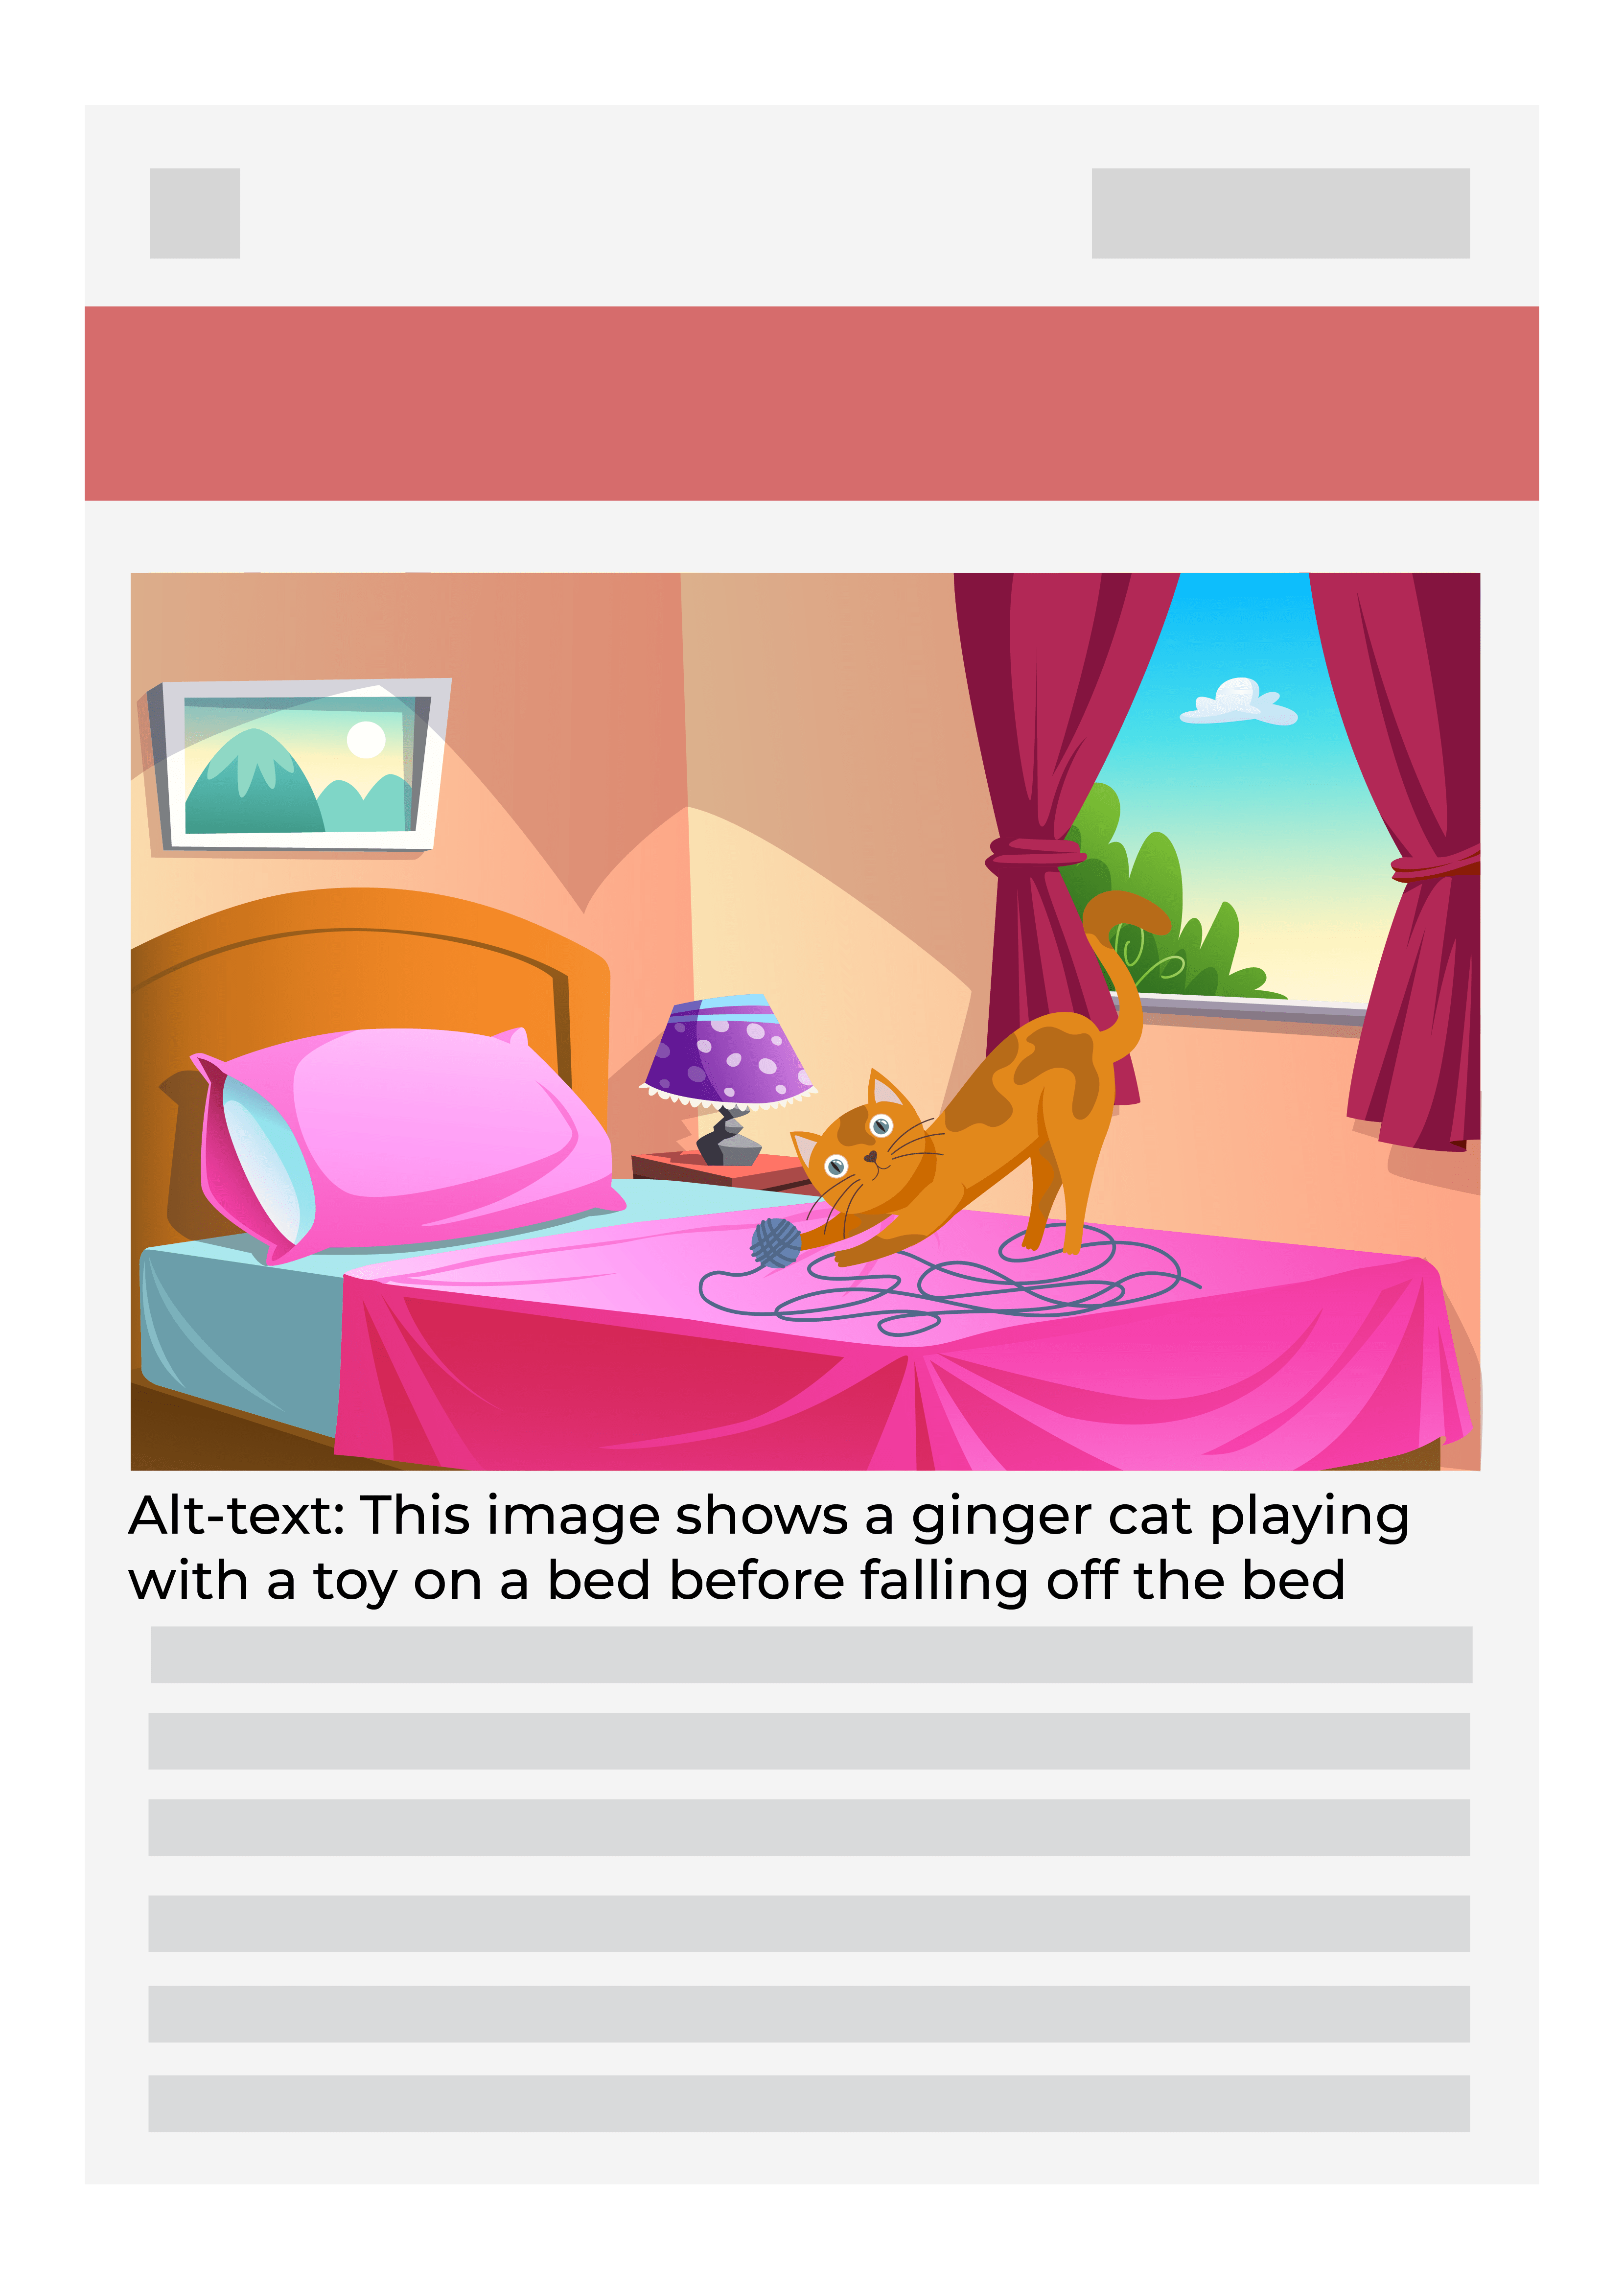 illustration showing an example of alt-text of a ginger cat playing with a toy on a bed